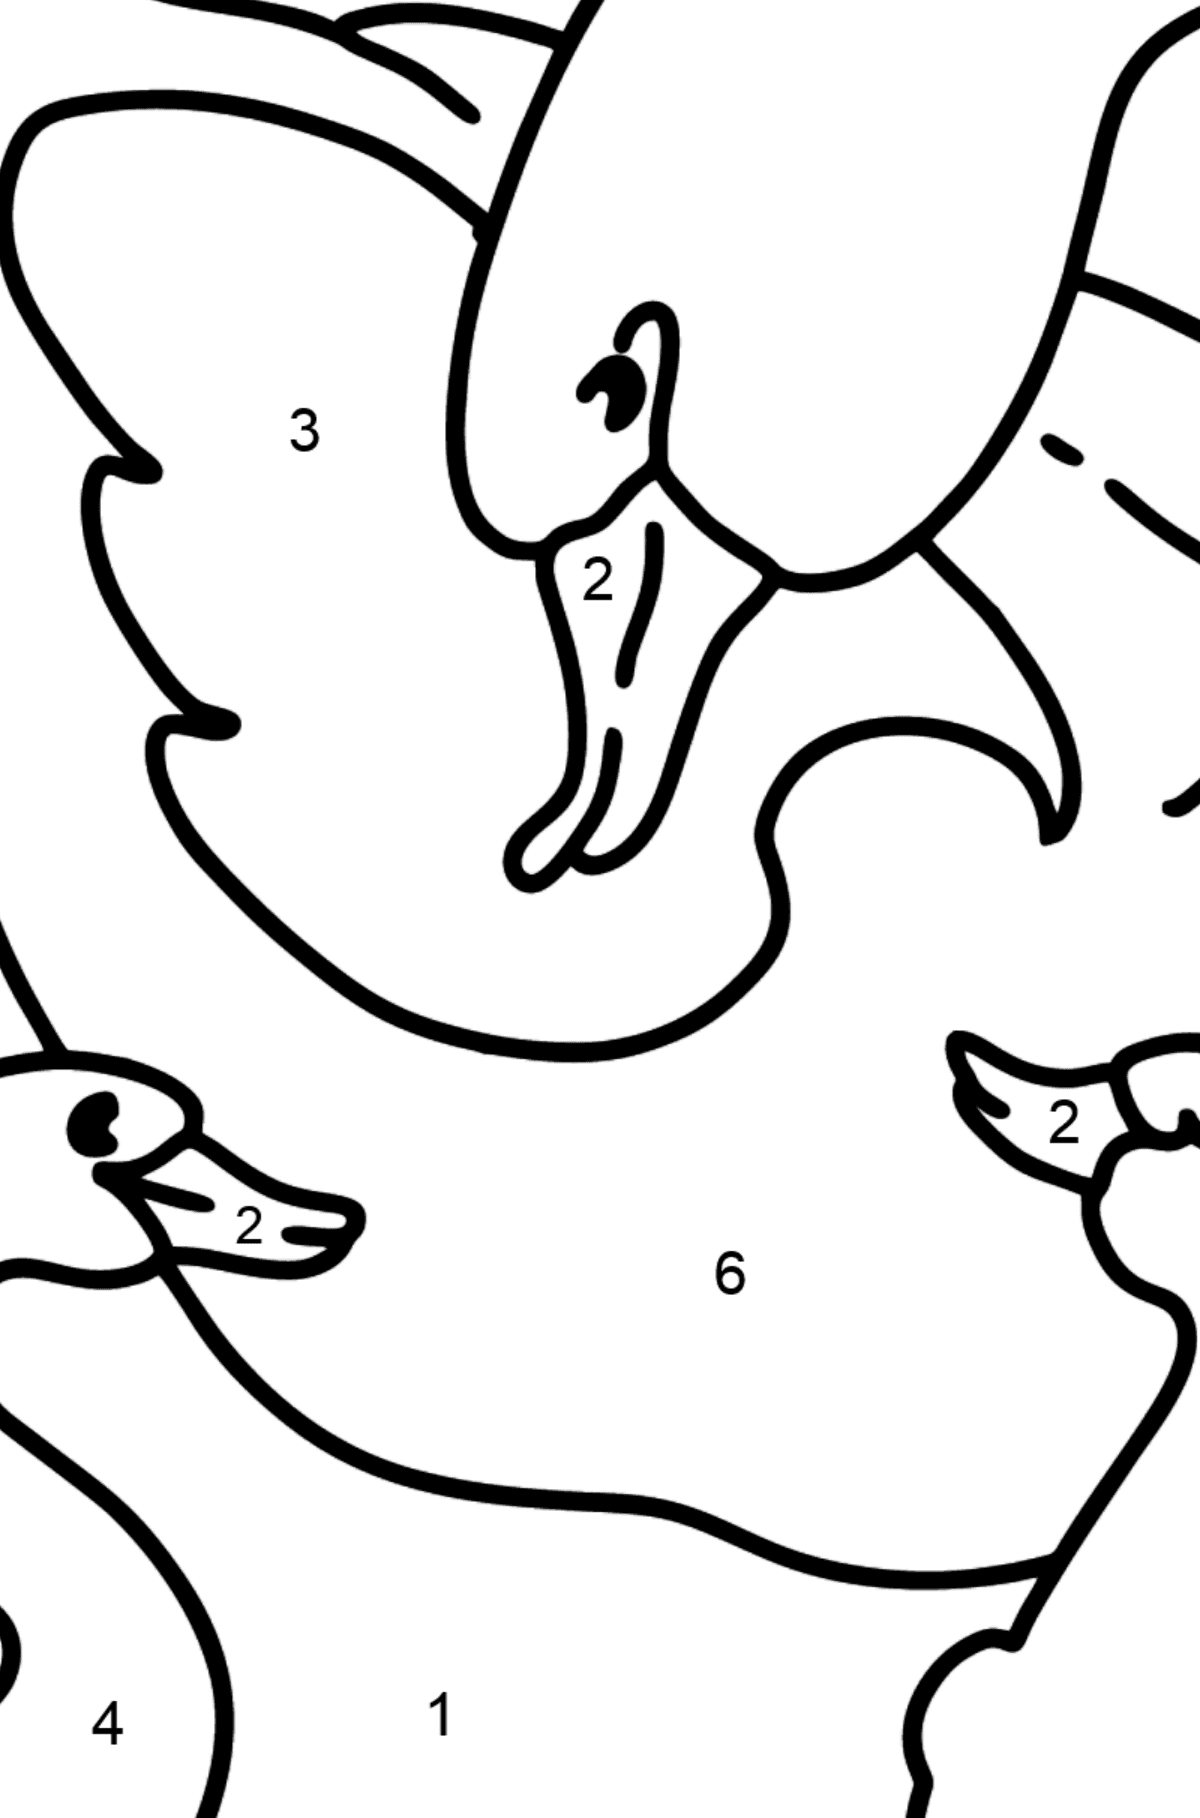 Duck with Ducklings on the Lake coloring page - Coloring by Numbers for Kids